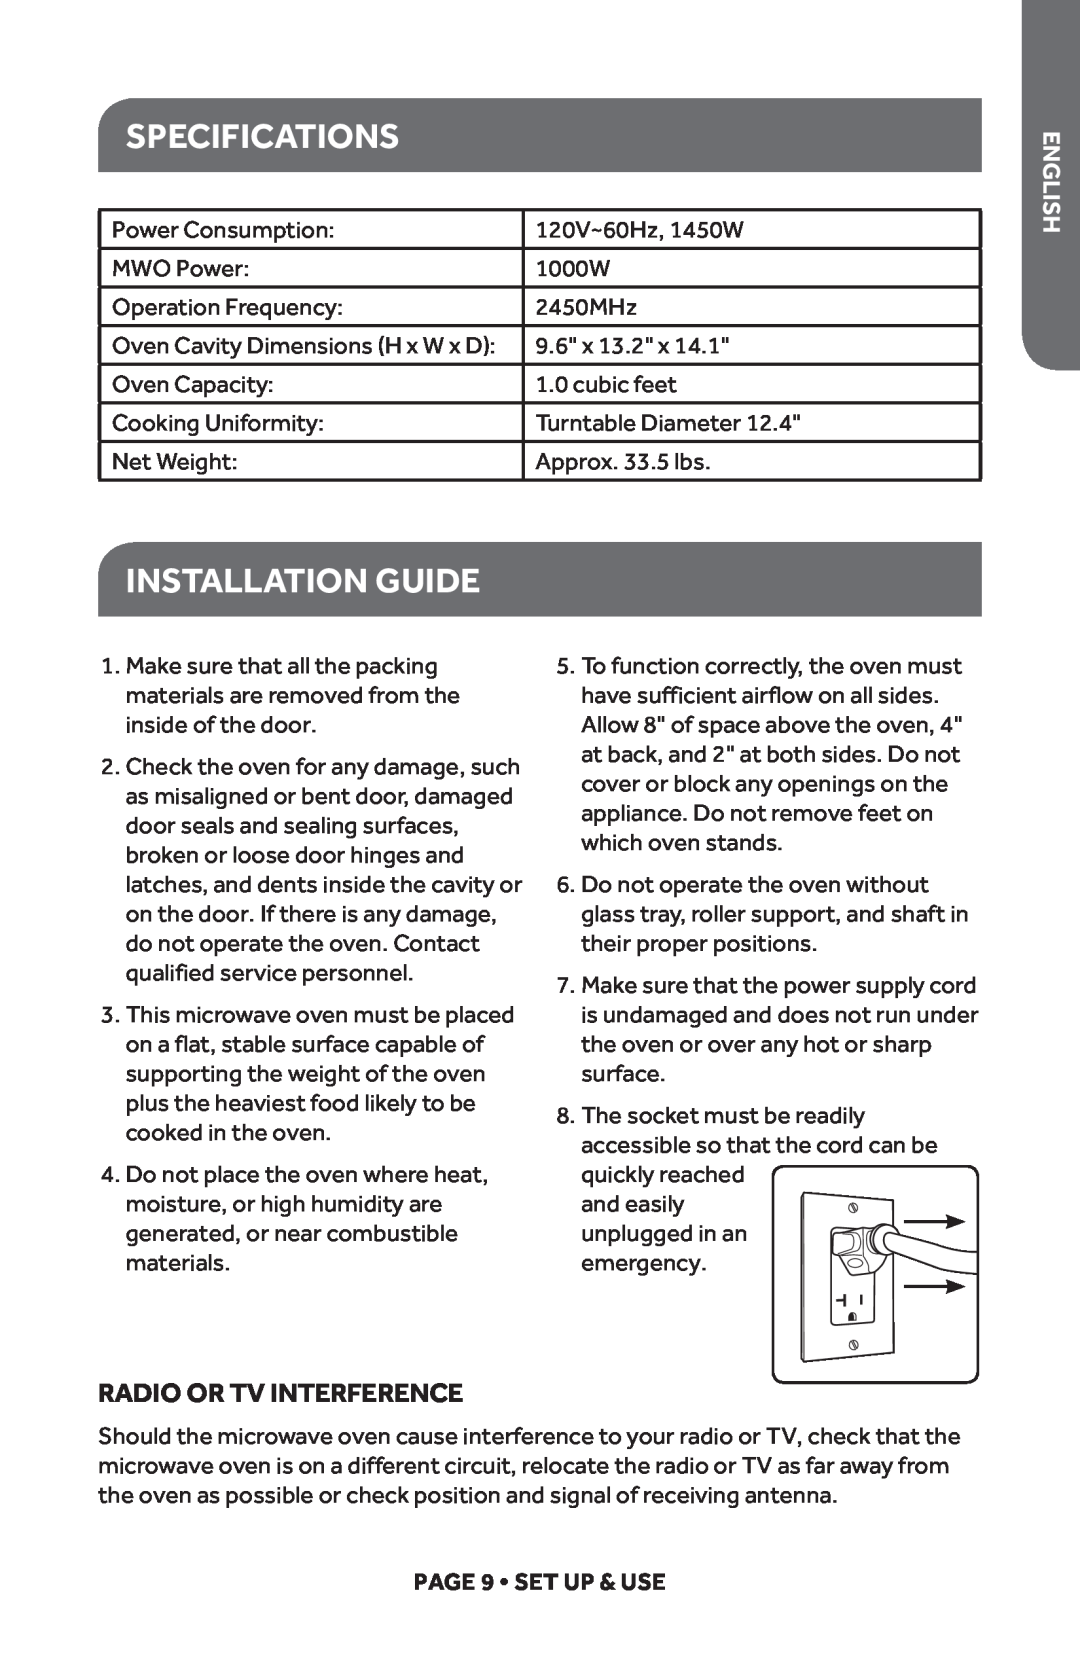 Haier HMC1035SESS user manual Specifications, Installation Guide, Radio Or Tv Interference, English, PAGE 9 SET UP & USE 